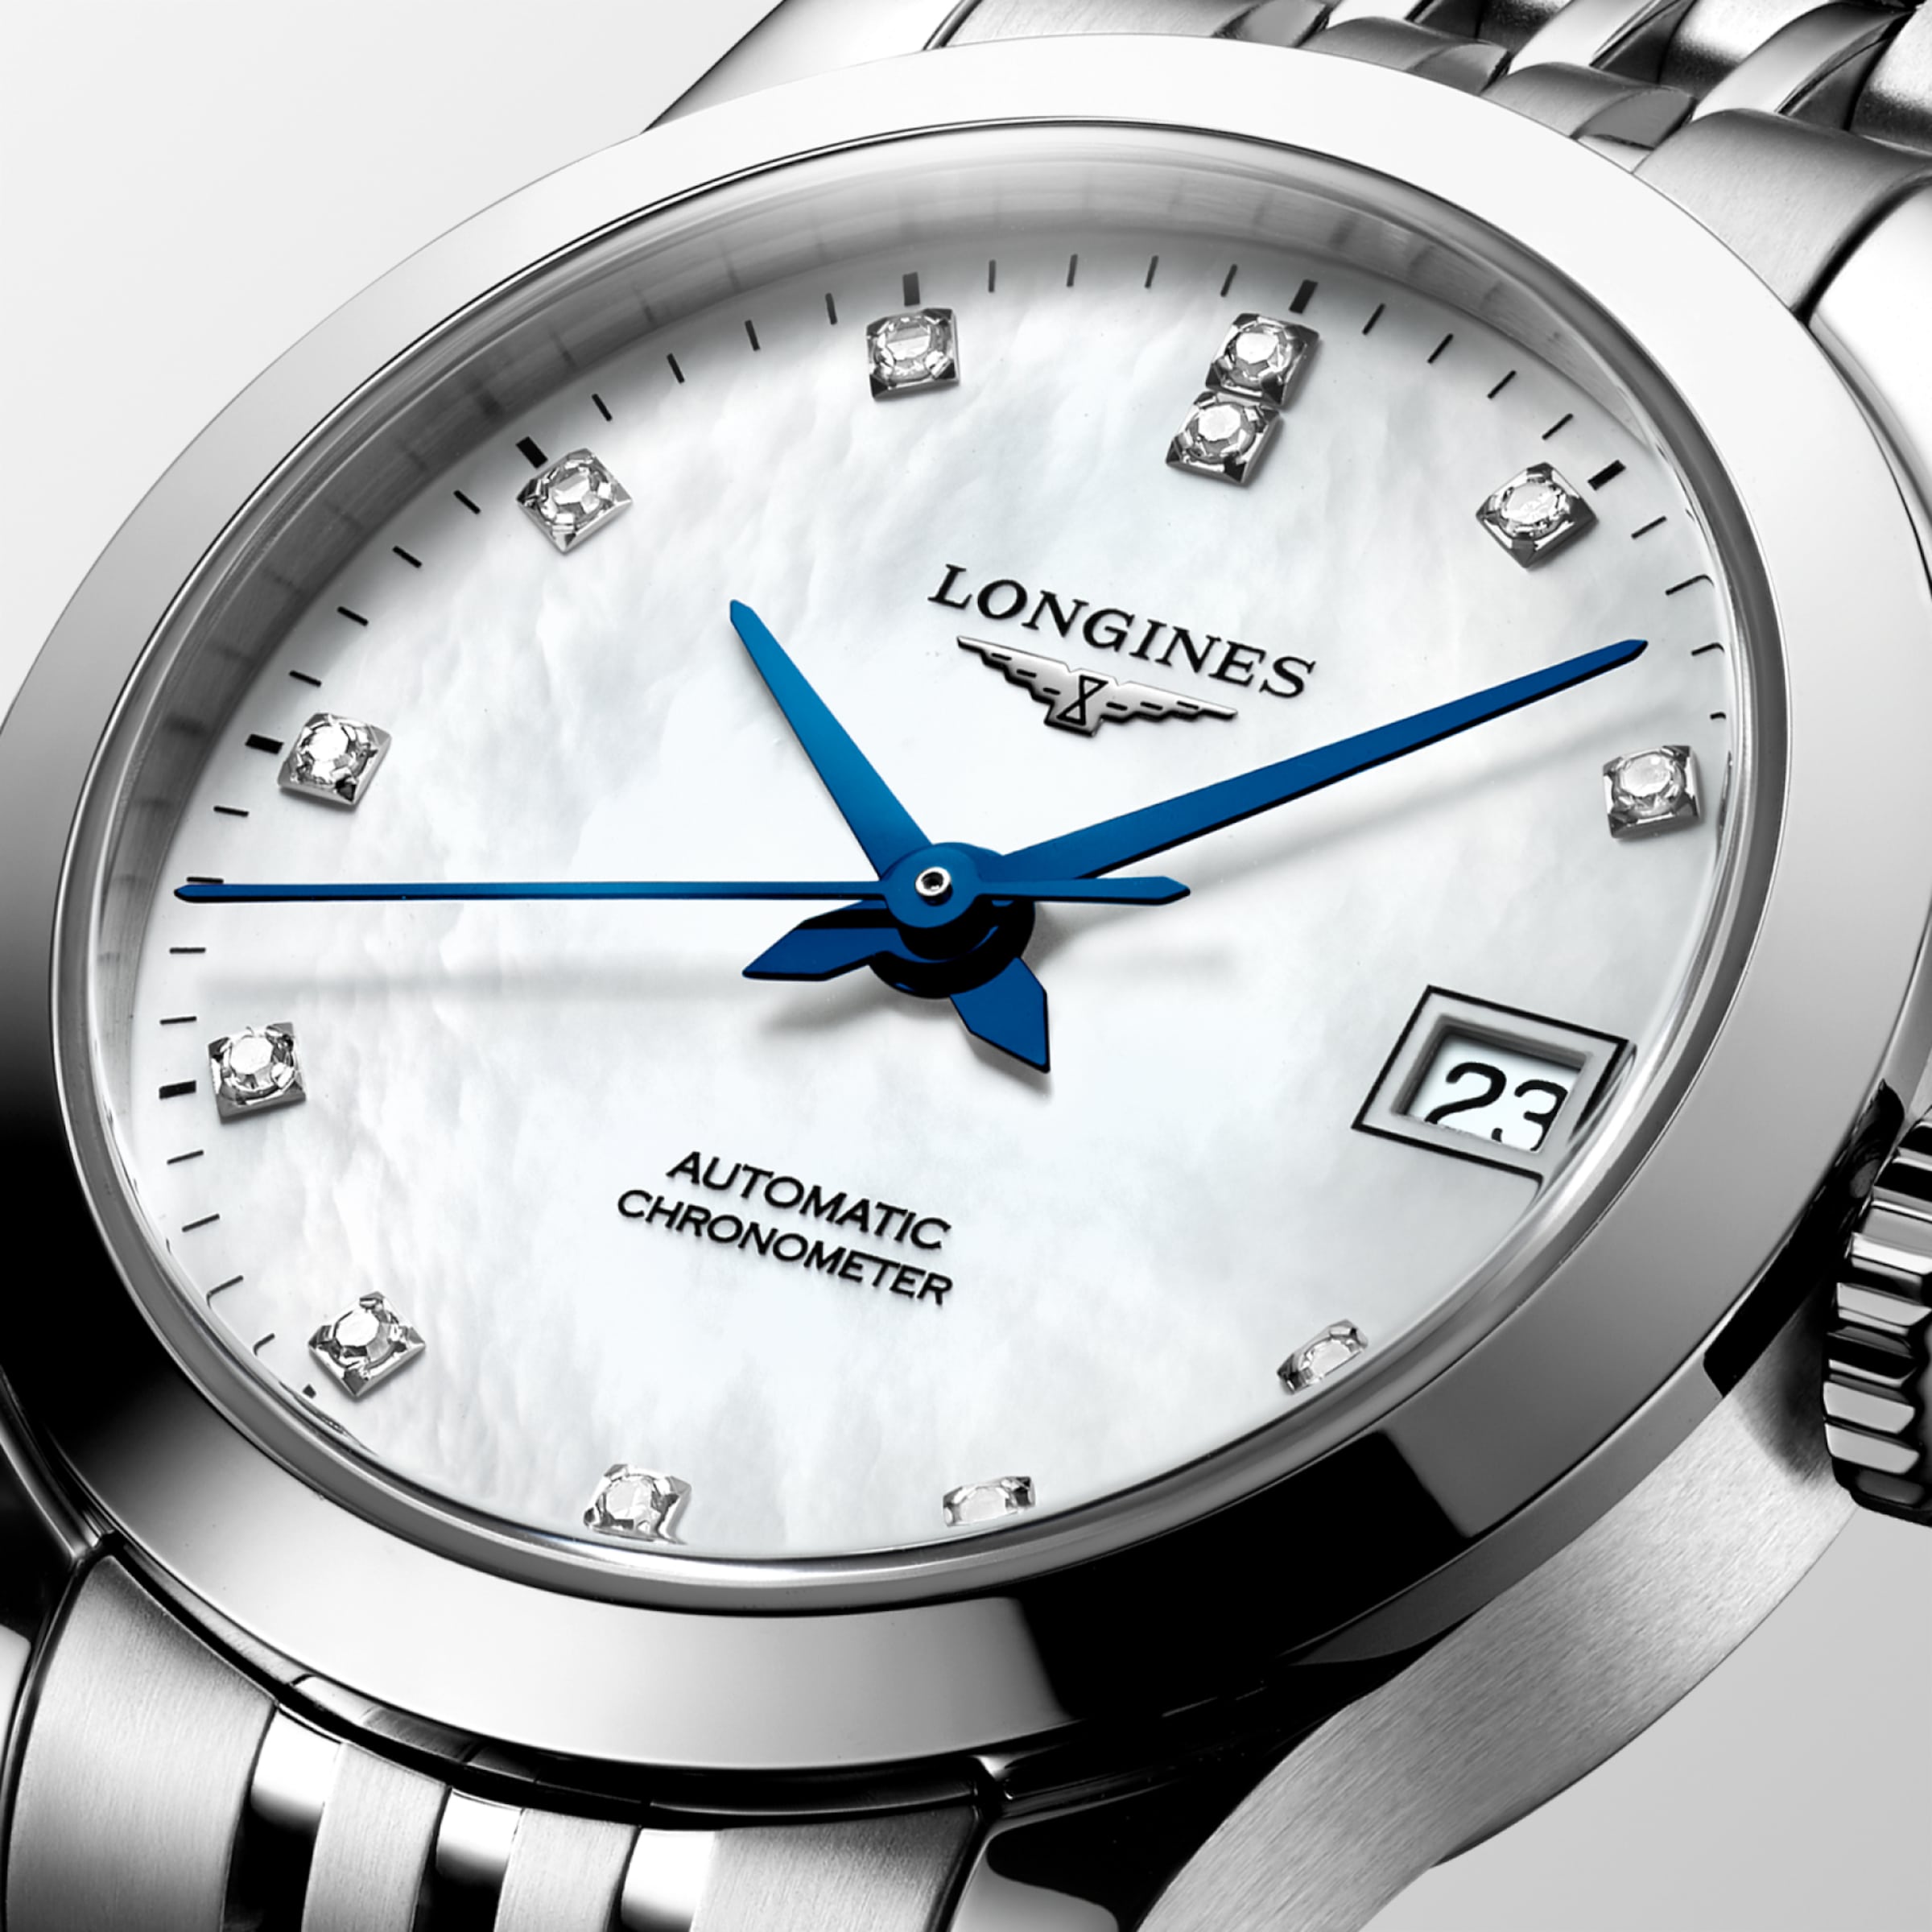 Longines RECORD Automatic Stainless steel Watch - L2.320.4.87.6